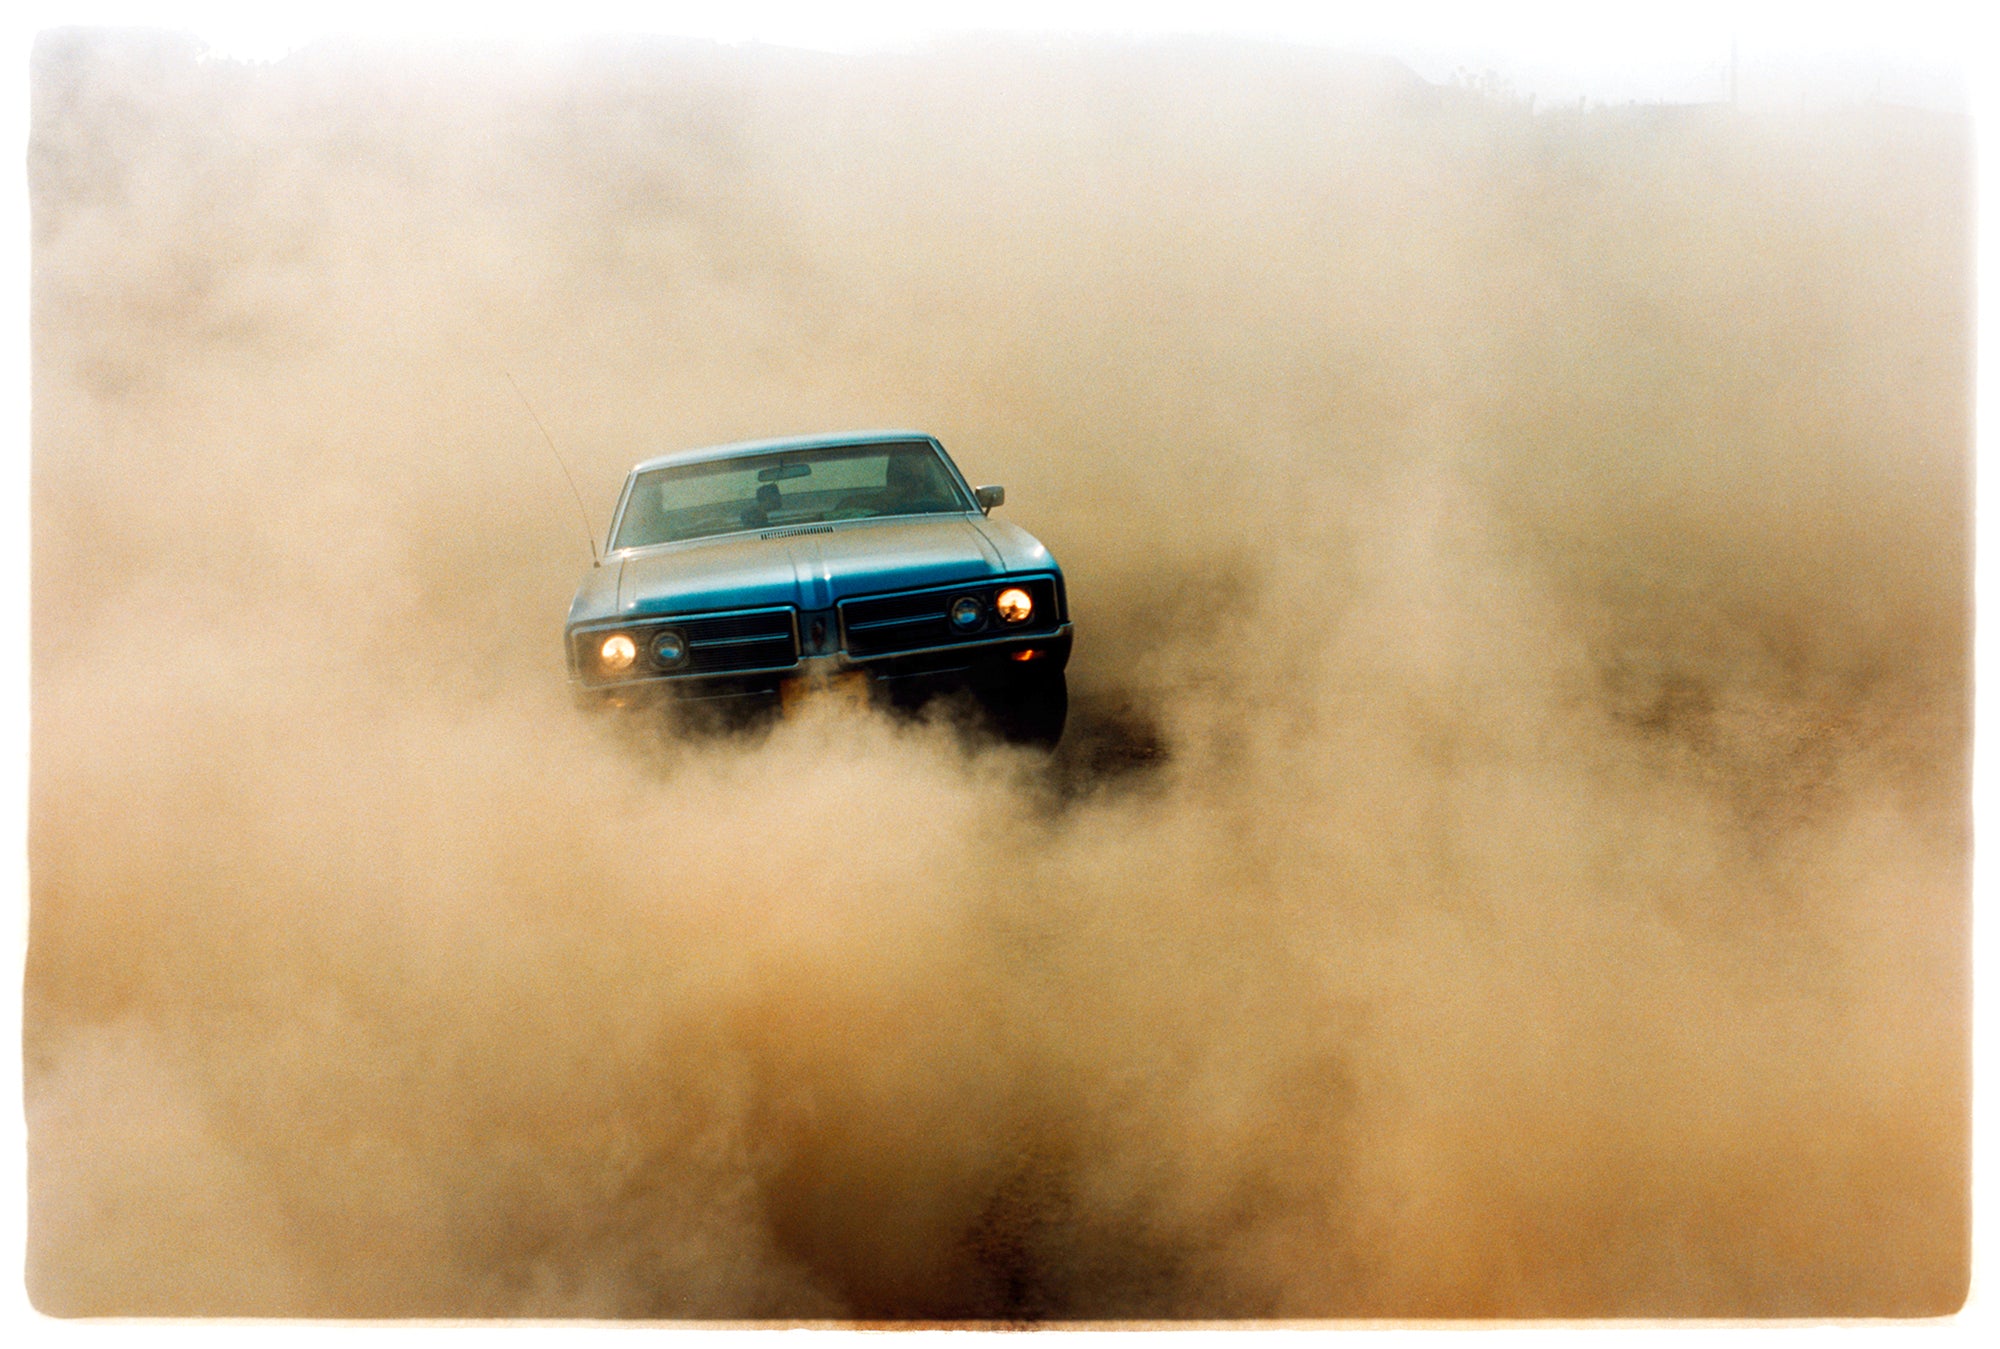 Photograph by Richard Heeps.  A light blue Buick car moving towards the camera and slightly obscured by the dust clouds which it has created.